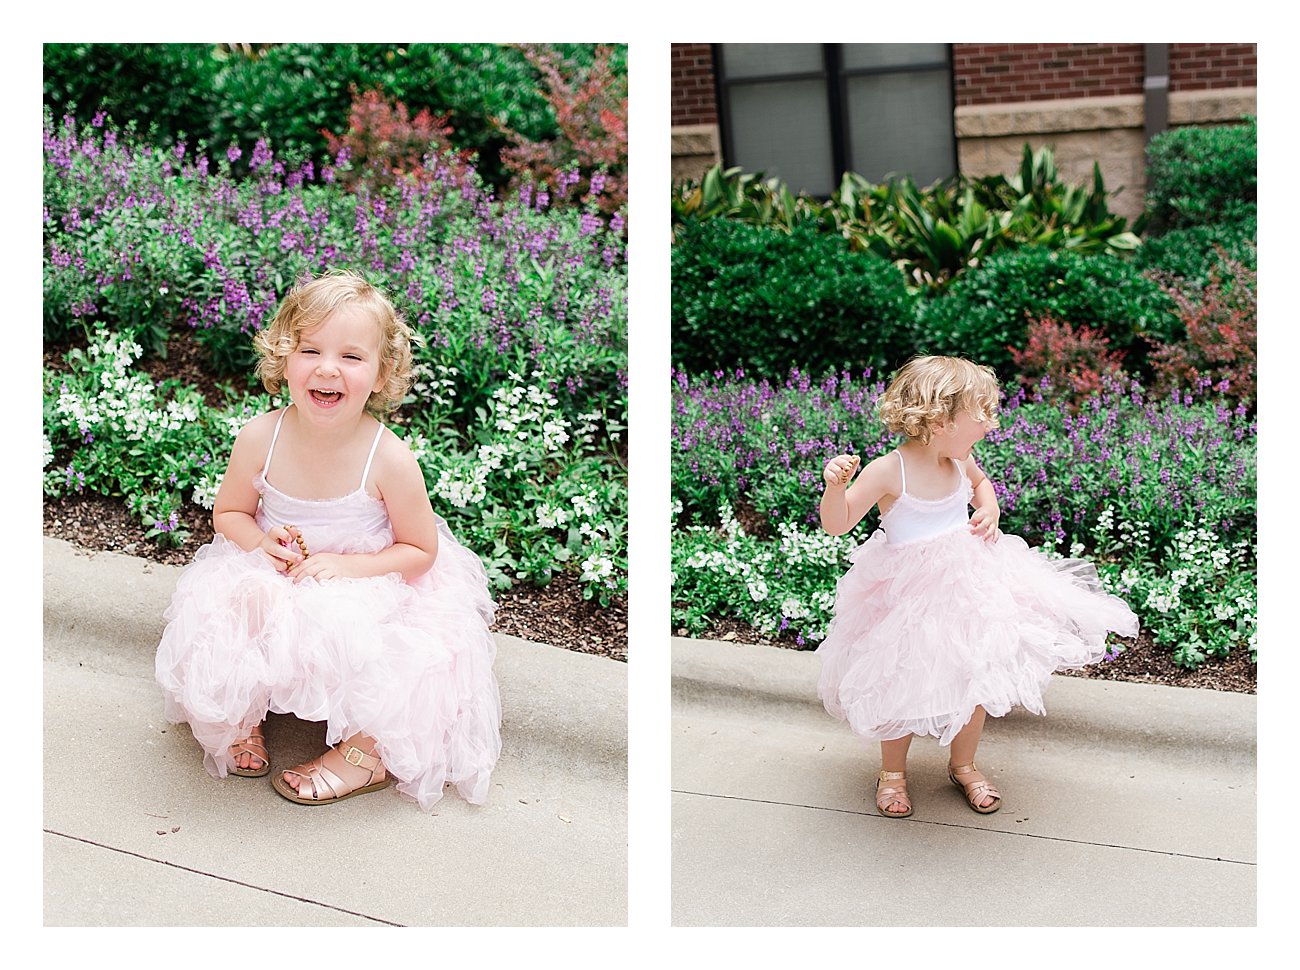 Ethical Wedding Guest Outfit Ideas for Mommy & Me (5)